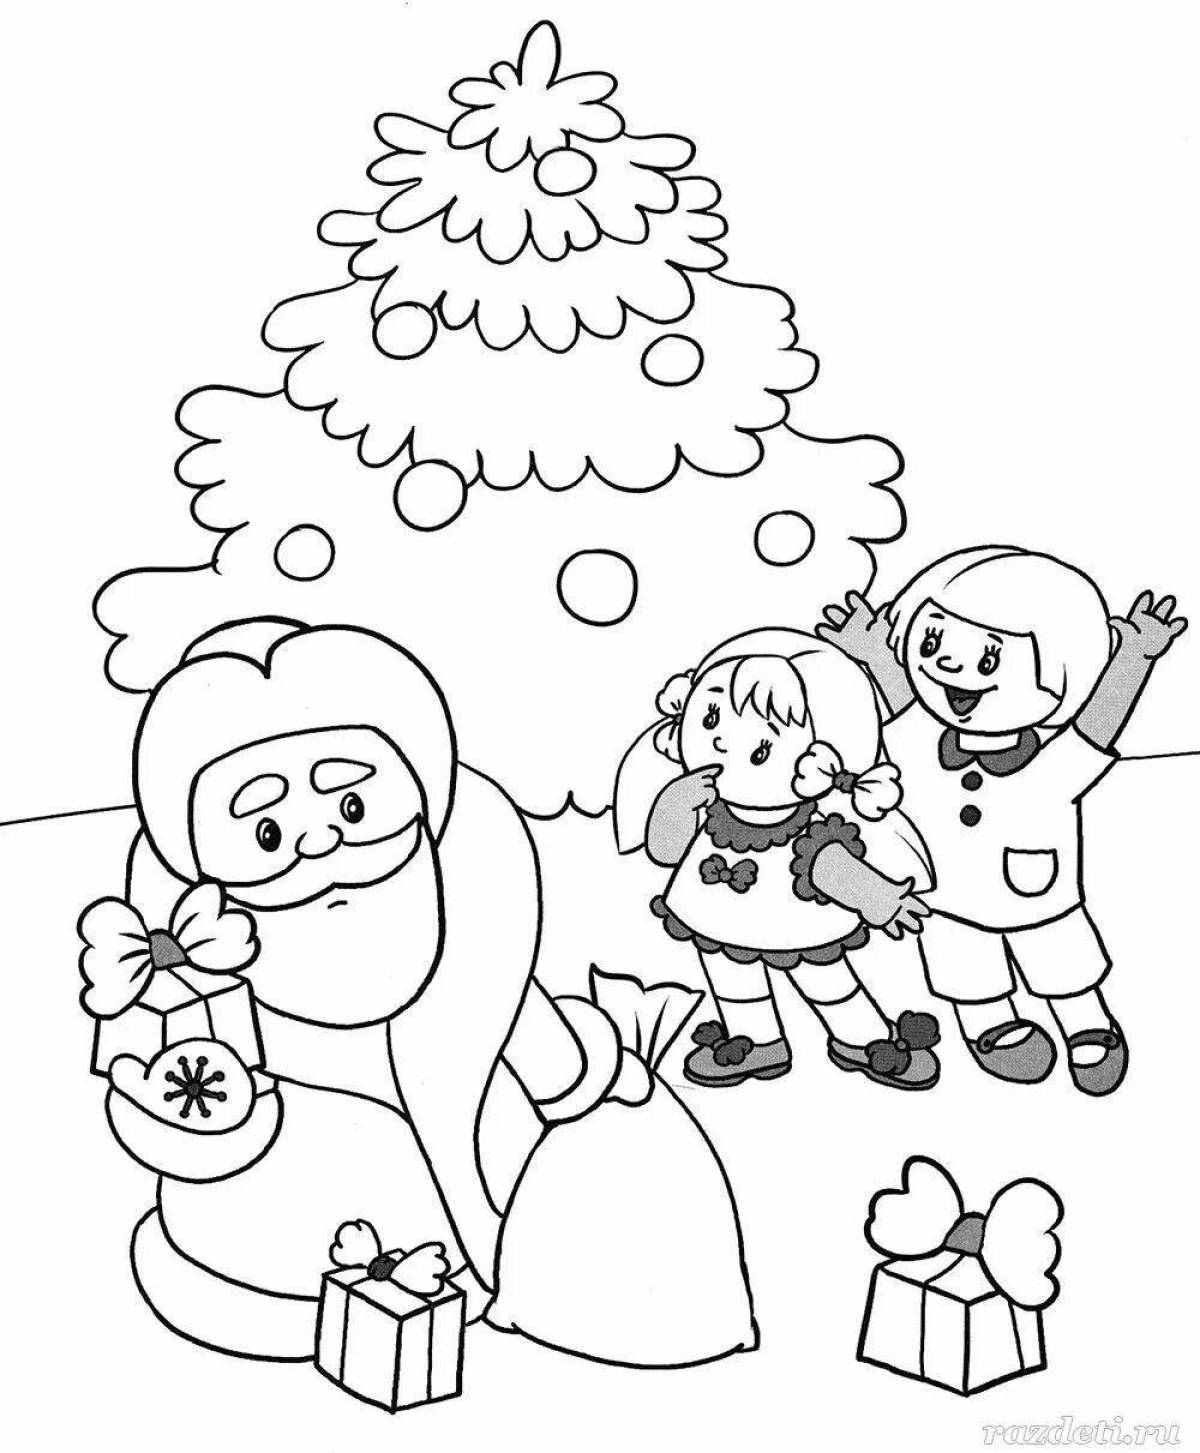 Delightful winter coloring book for 2-3 year olds